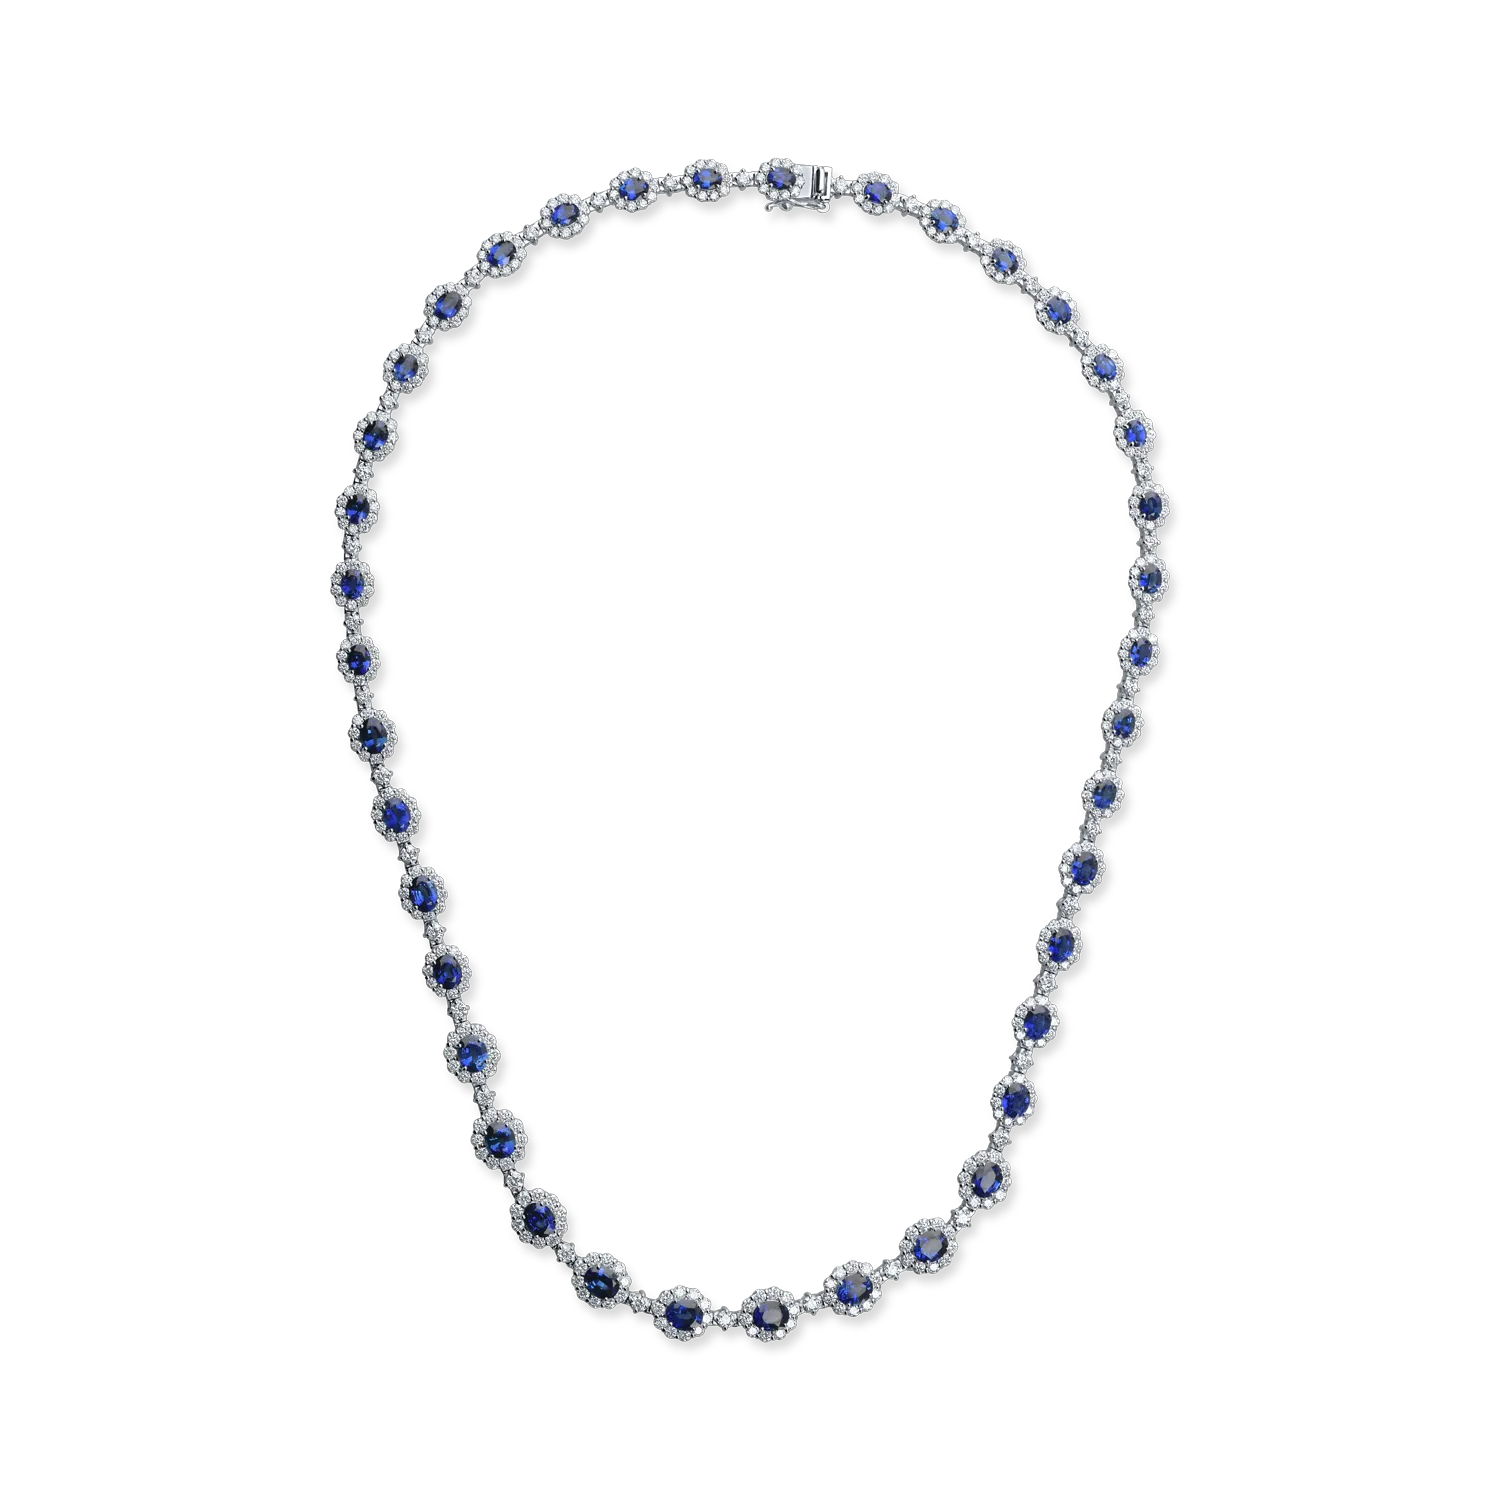 Platinum necklace with 12.63ct sapphires and 6.83ct diamonds